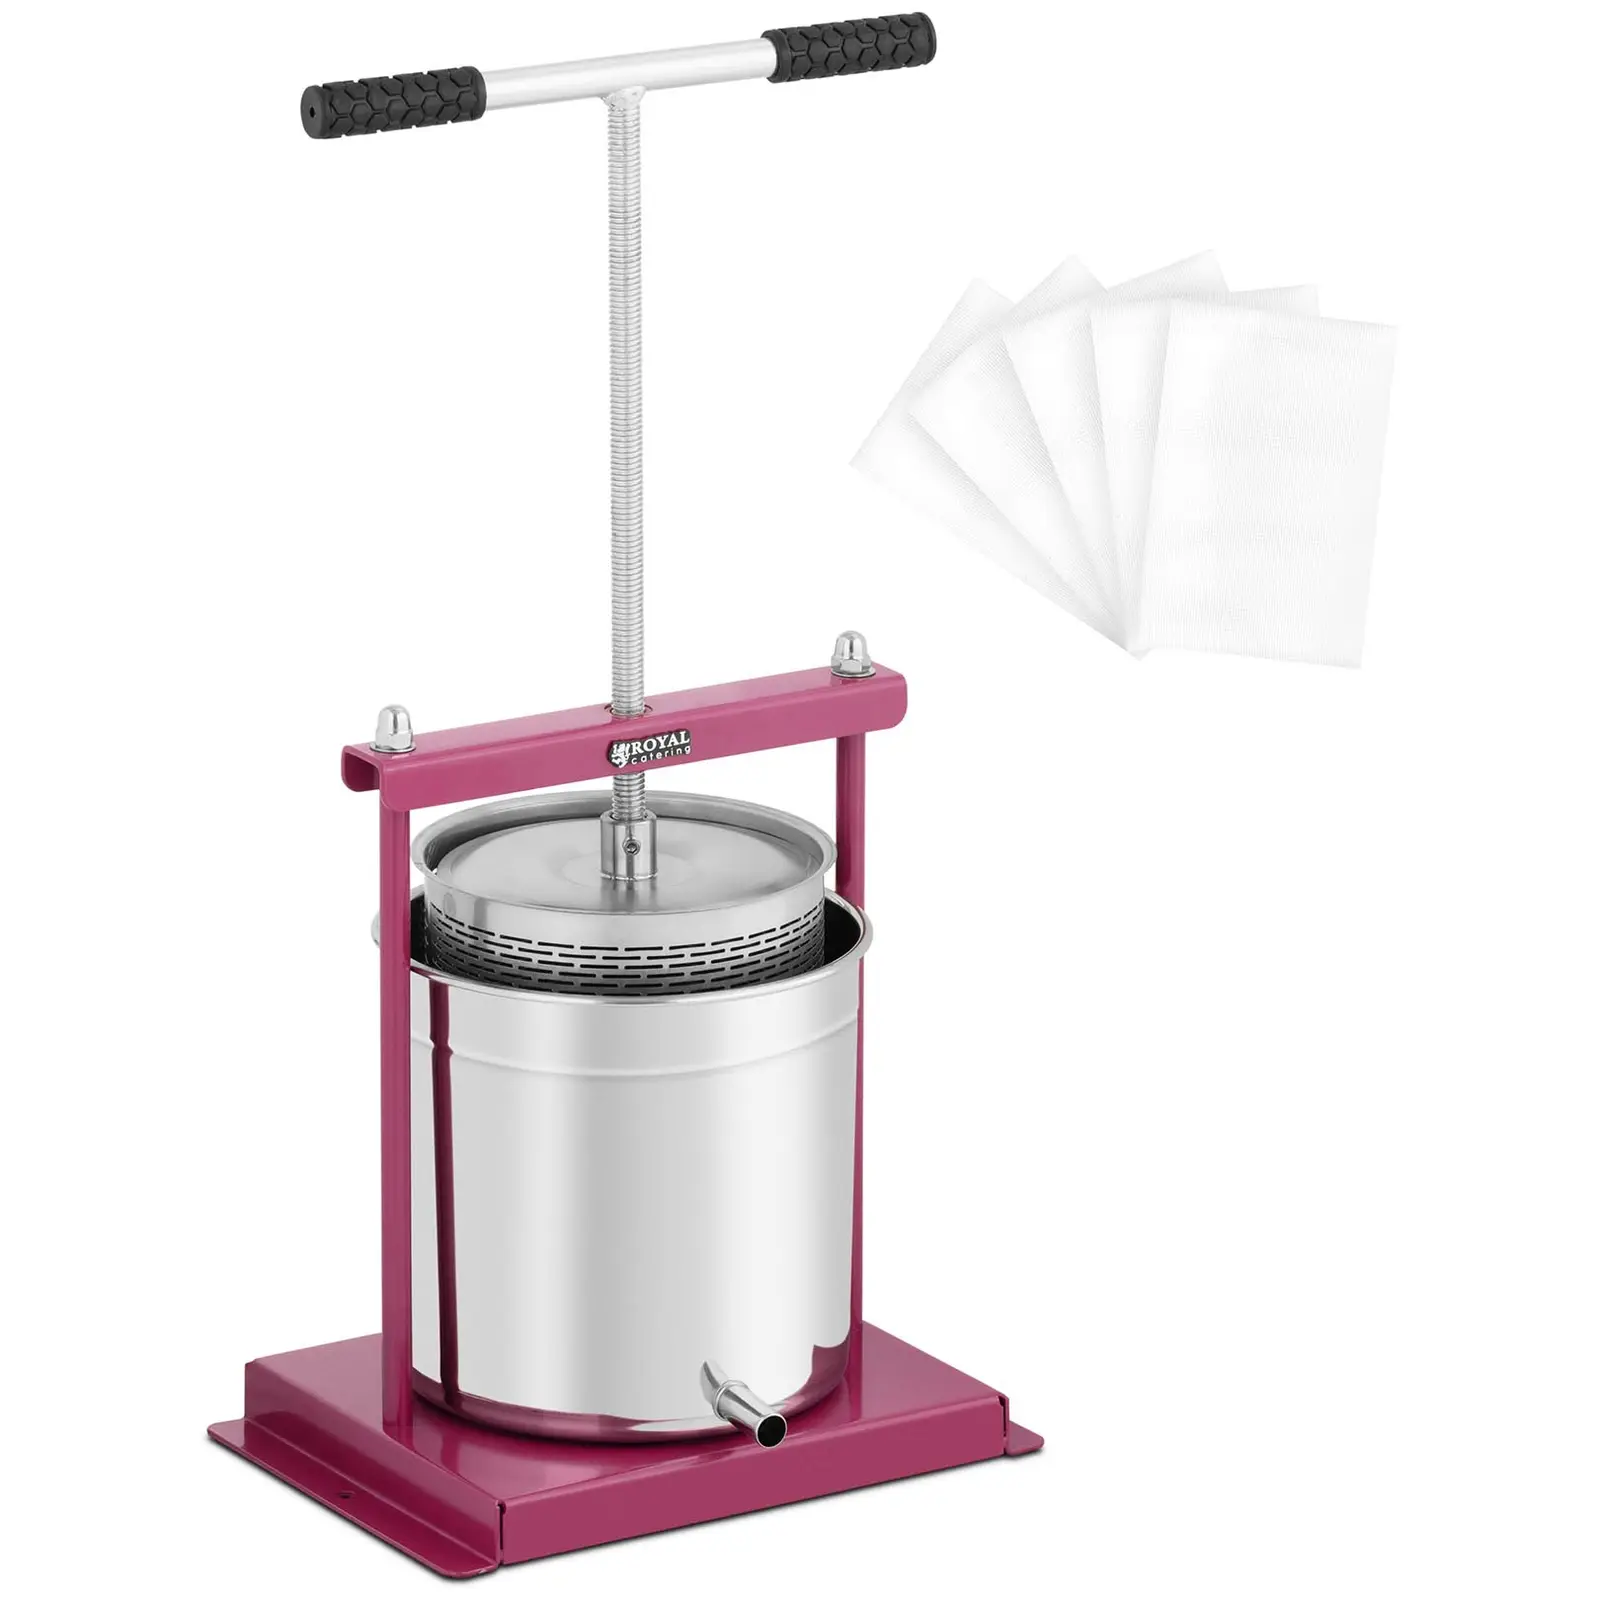 Juice Press - stainless steel/iron - 12 l - incl. 5 muslin cloths - Royal Catering